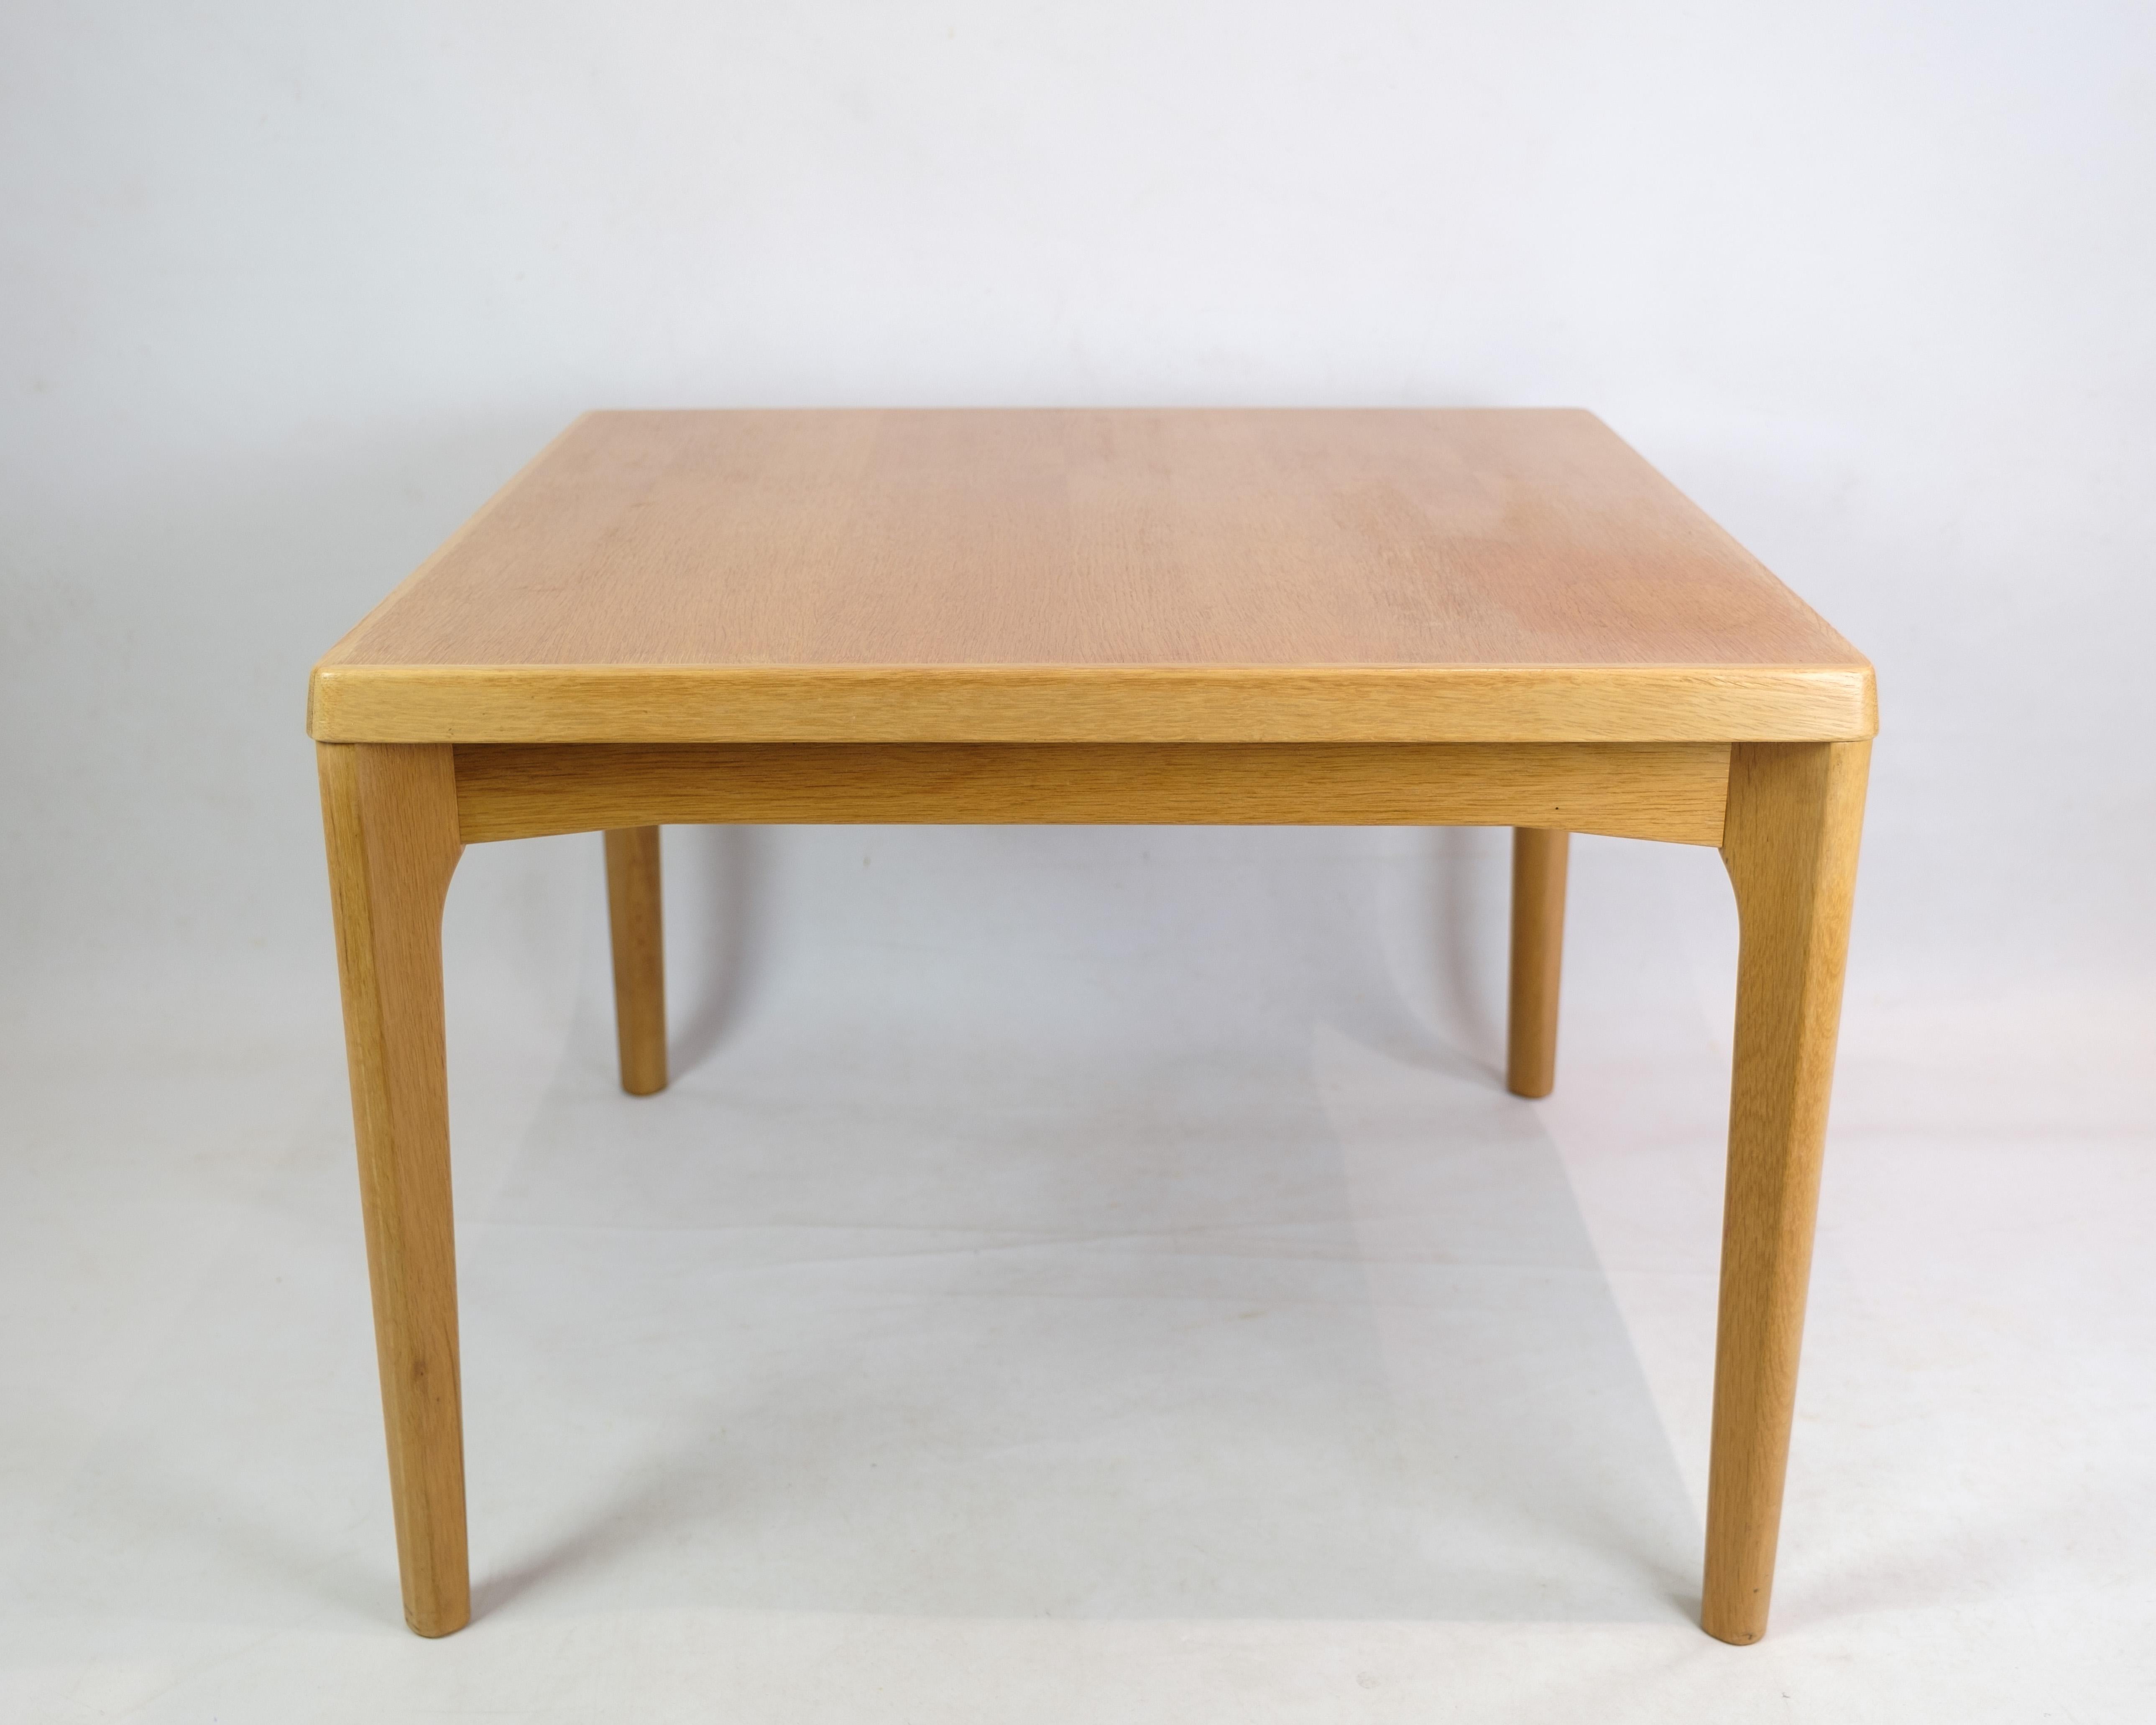 Coffee table in oak, designed by Henning Kjærnulf and manufactured by Vejle chairs and furniture factory from around the 1960s. A square square coffee table in both good condition and of good quality.